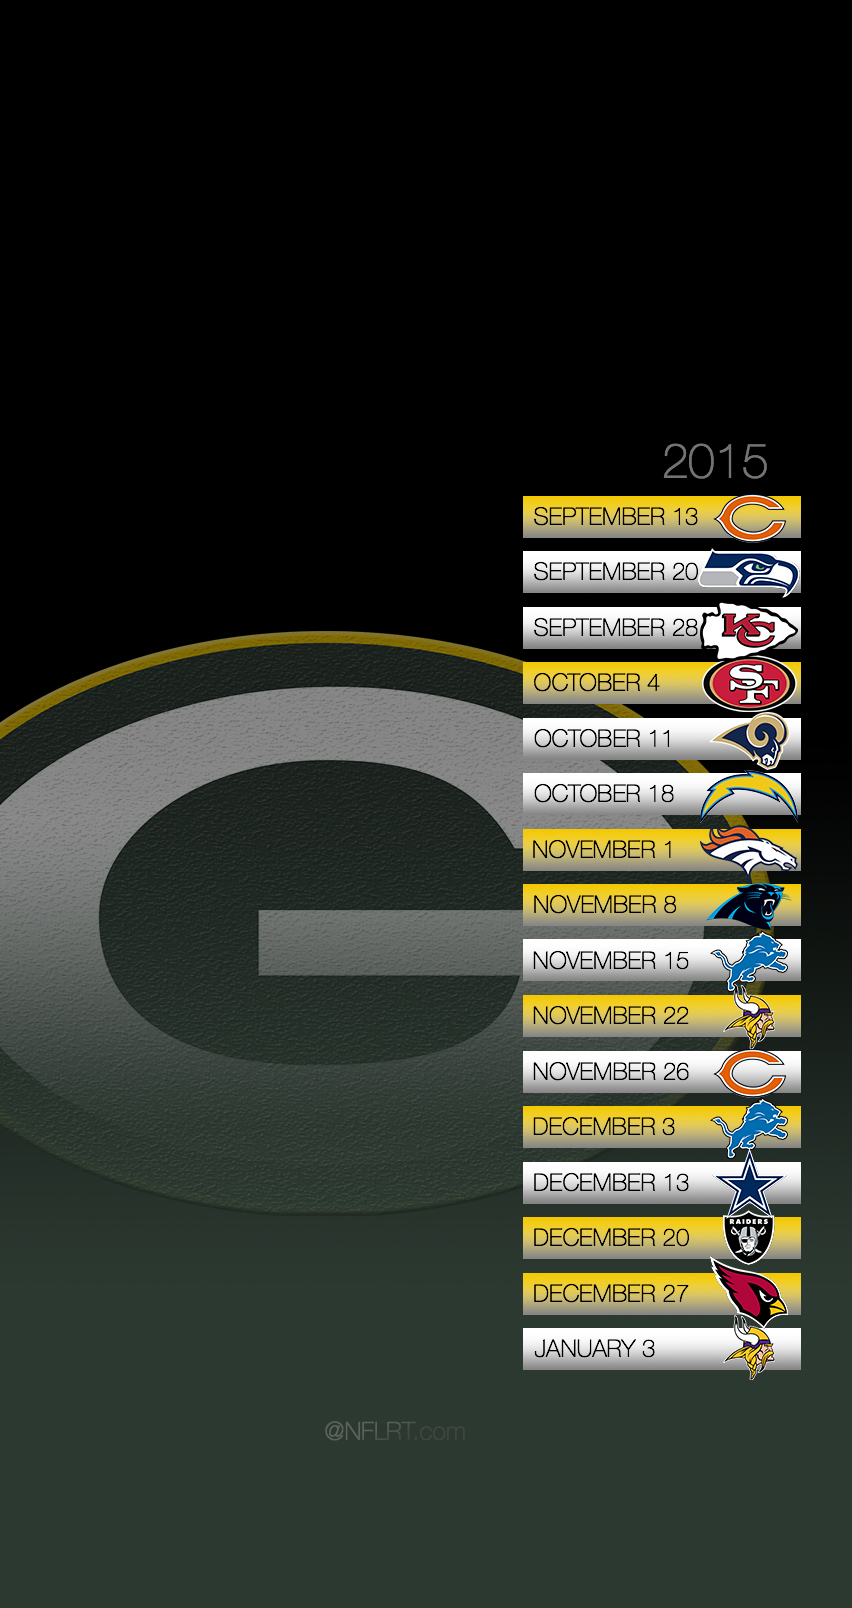 2015 NFL Schedule Wallpapers - Page 4 of 8 - @NFLRT